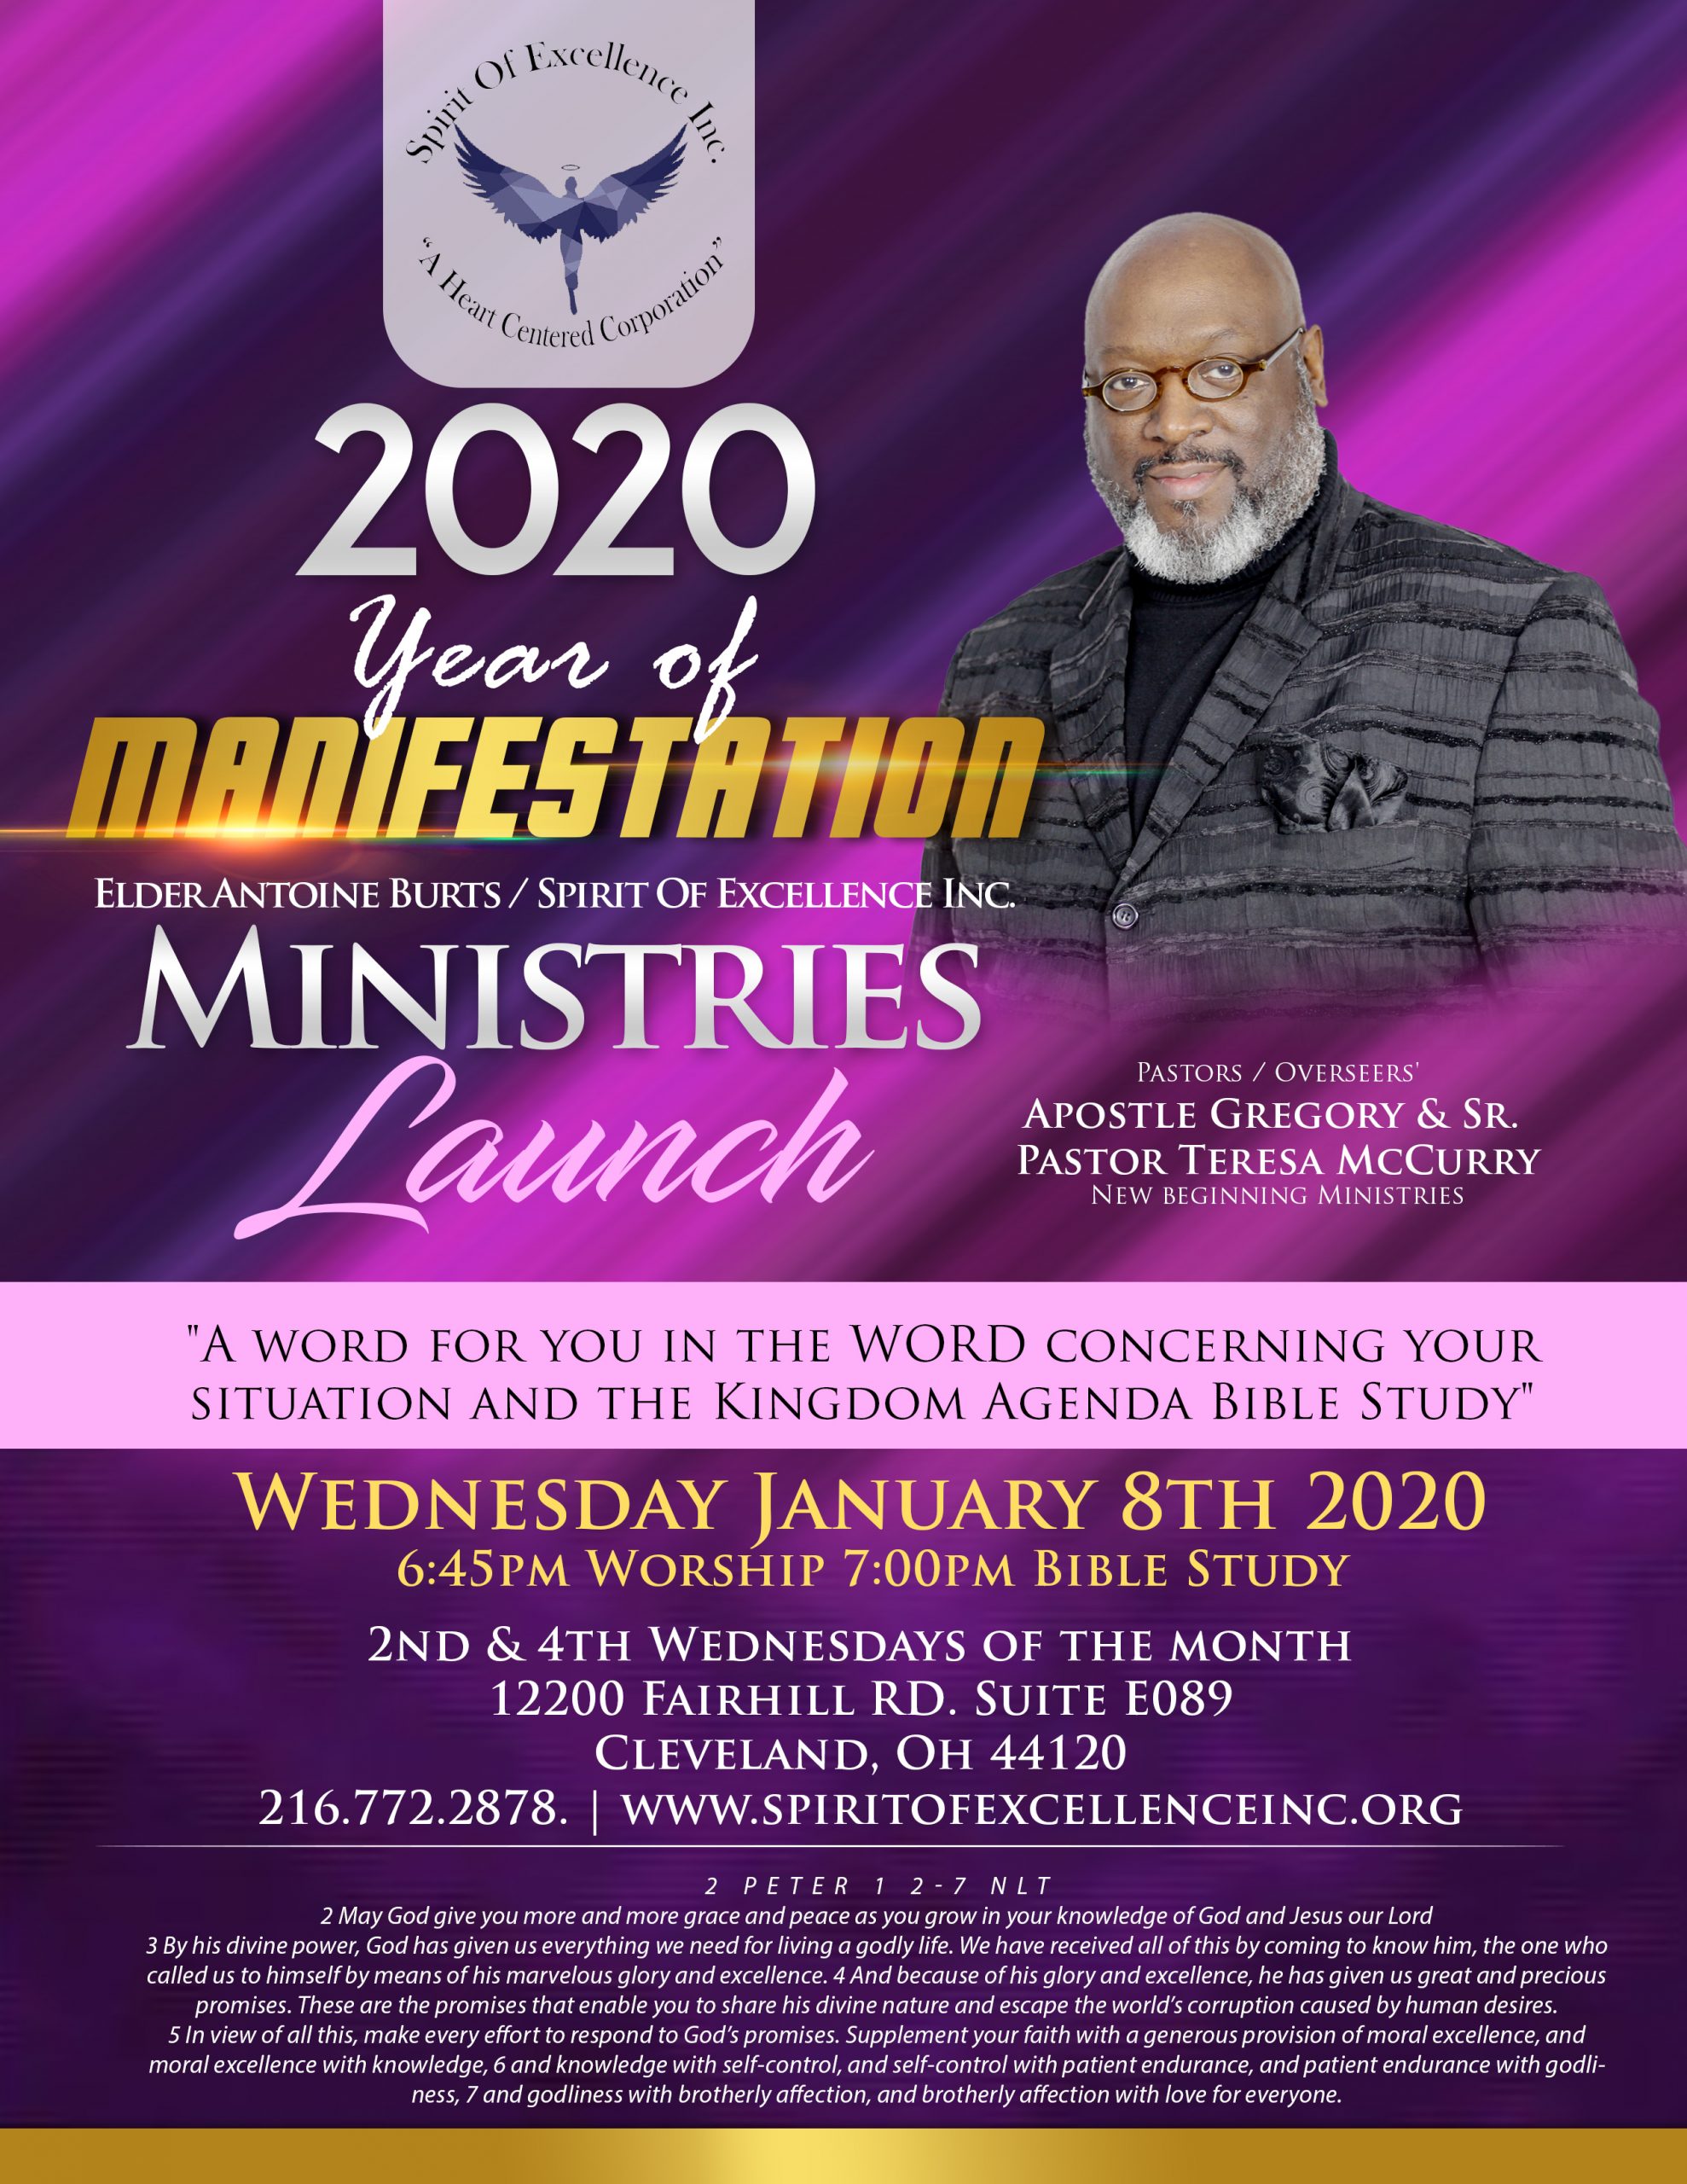 Spirit Of Excellence Inc. A New Beginning Ministry invites you to join in on the manifestitation of momentum...